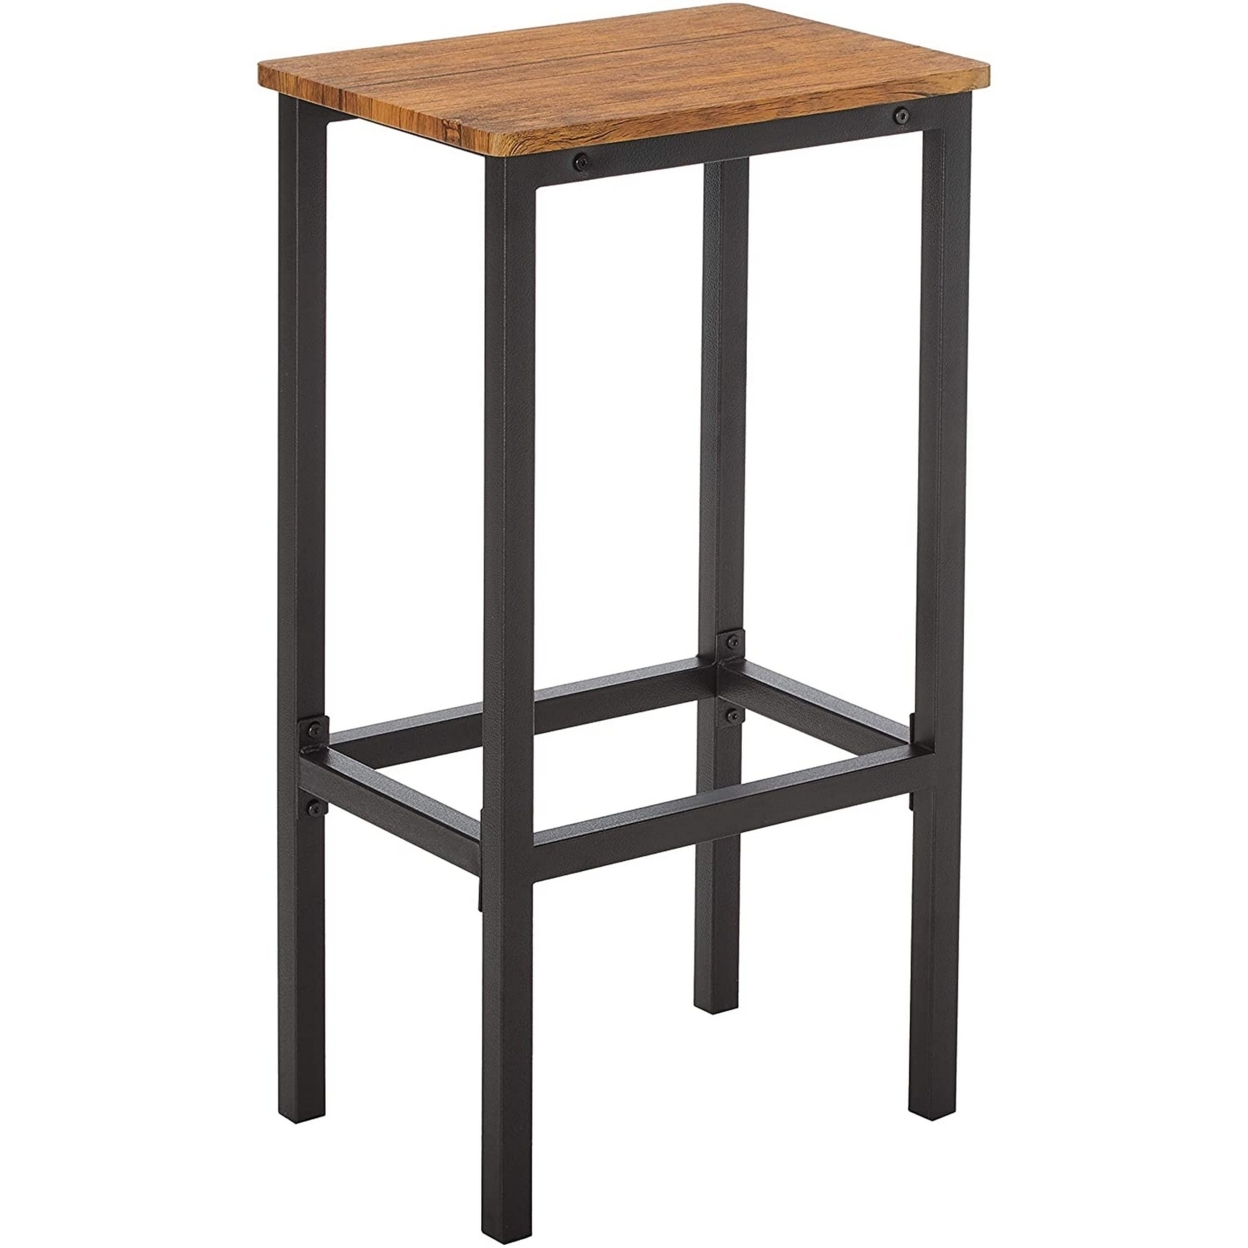 5 Piece Wooden Bar Table And Bar Stools With Metal Legs, Brown And Black- Saltoro Sherpi